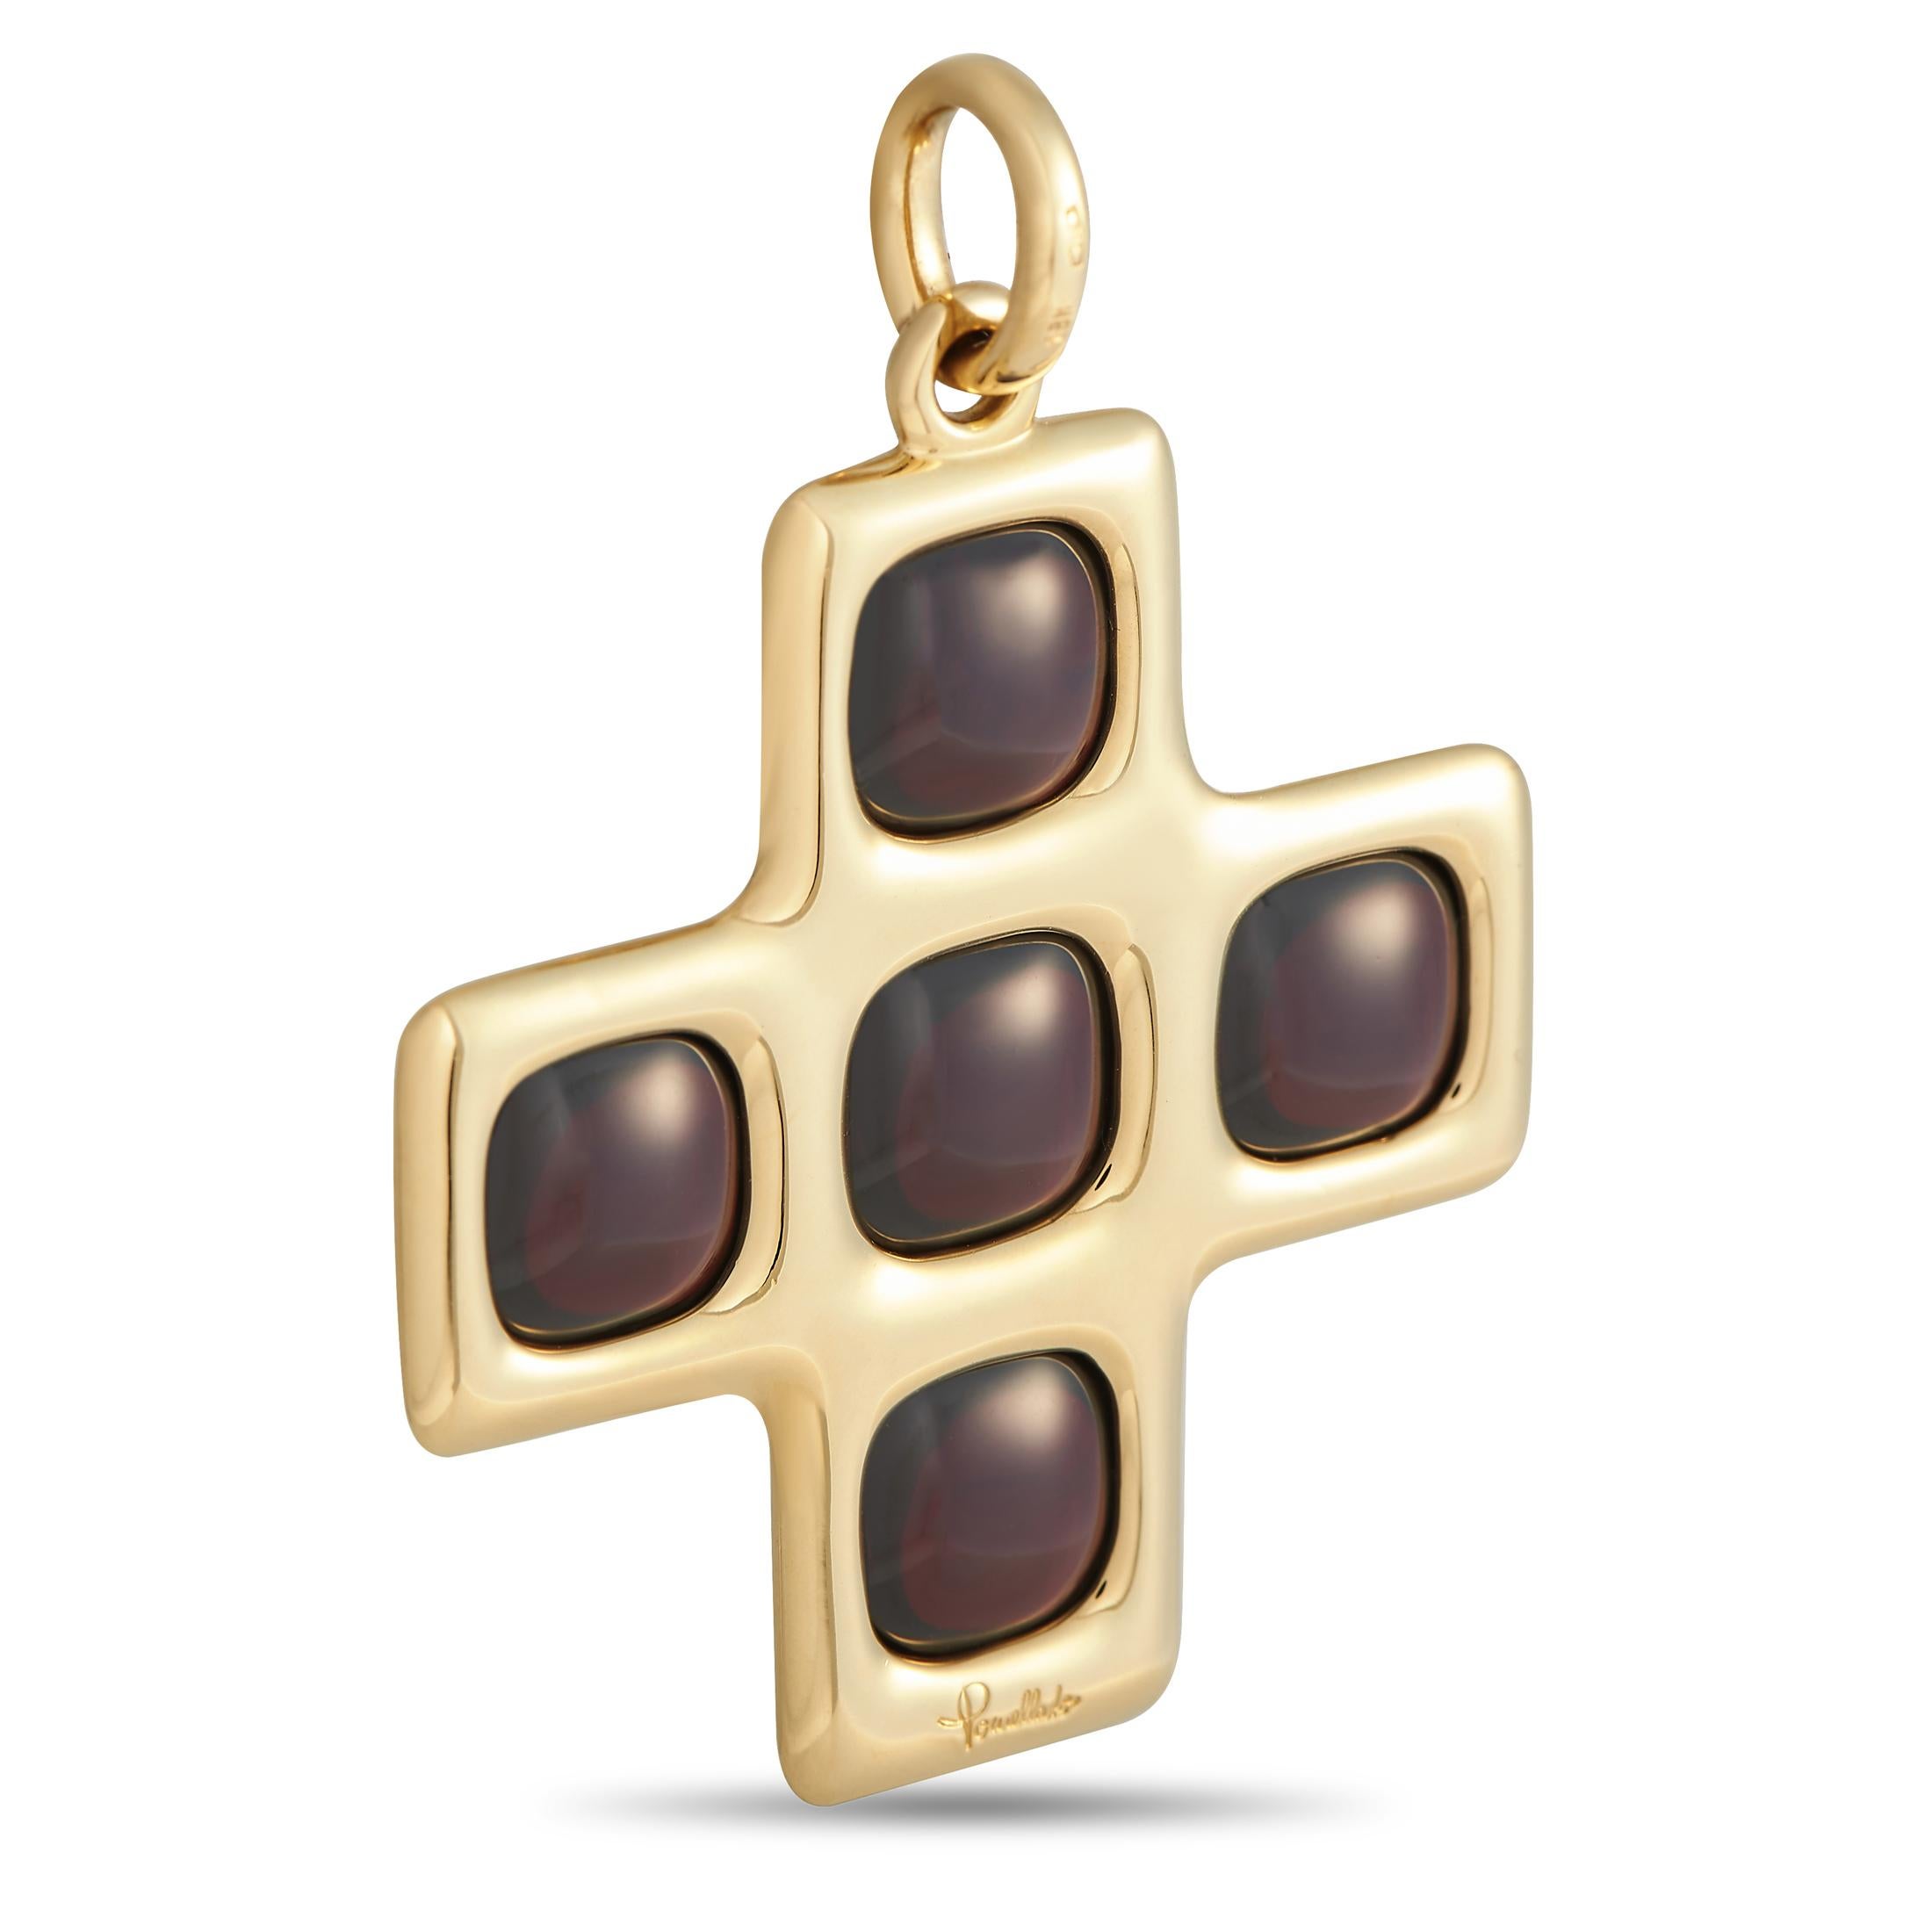 A bold and unconventional jewel from luxury Italian jewelry maker, Pomellato. This cross pendant measures 2.25 by 1.55 inches and features a smooth and polished finish, detailed with five smooth and domed garnet cabochons.This signed Pomellato 18K